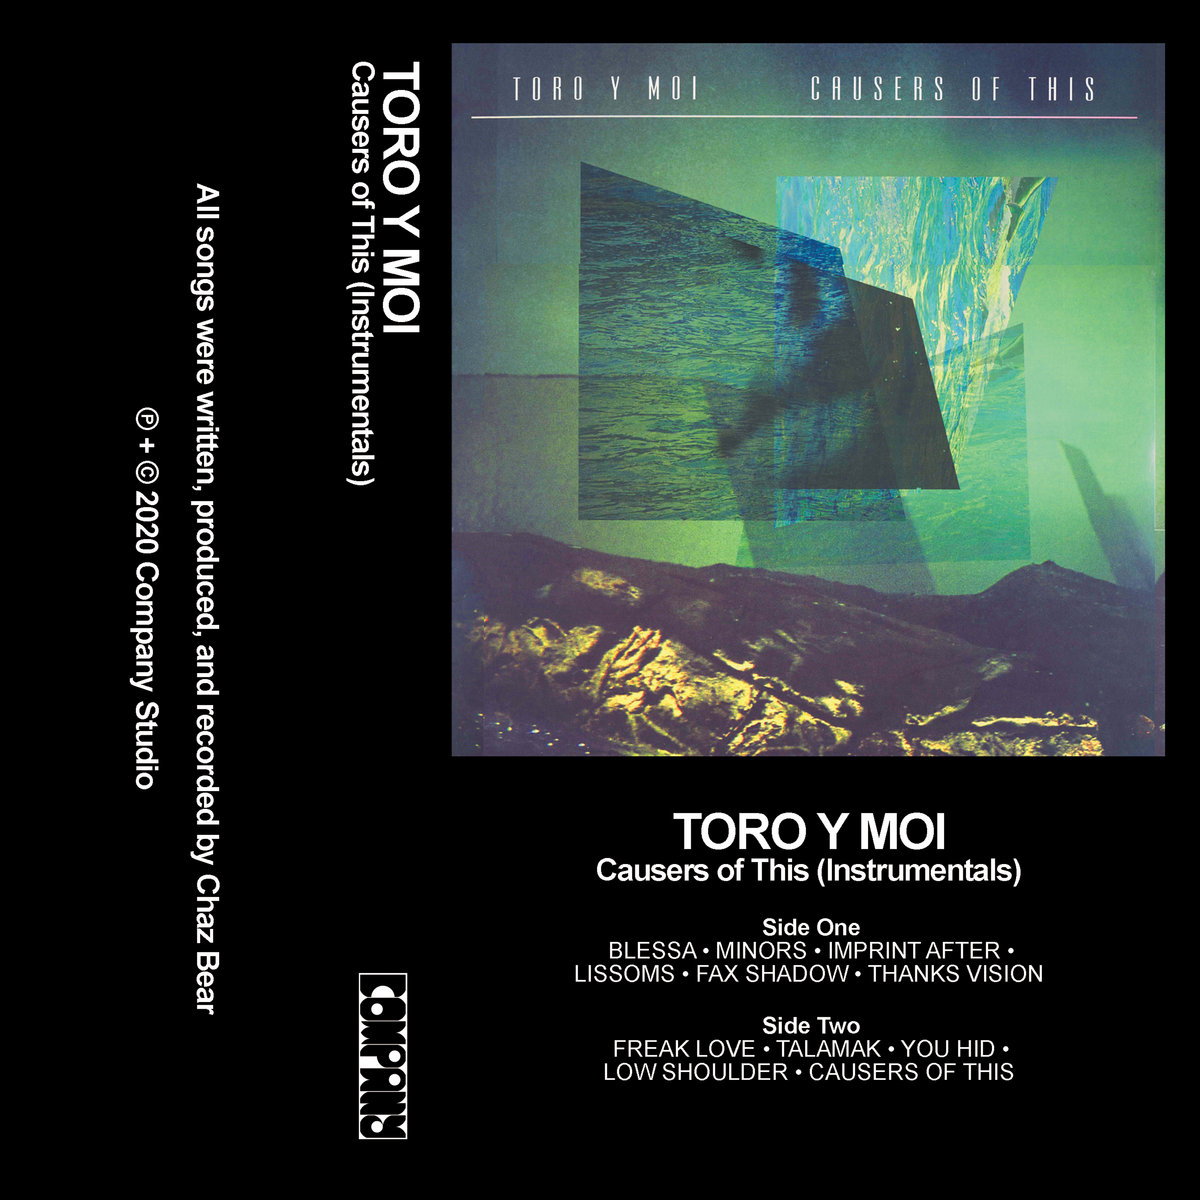 Causers of This (Instrumentals) | Toro y Moi